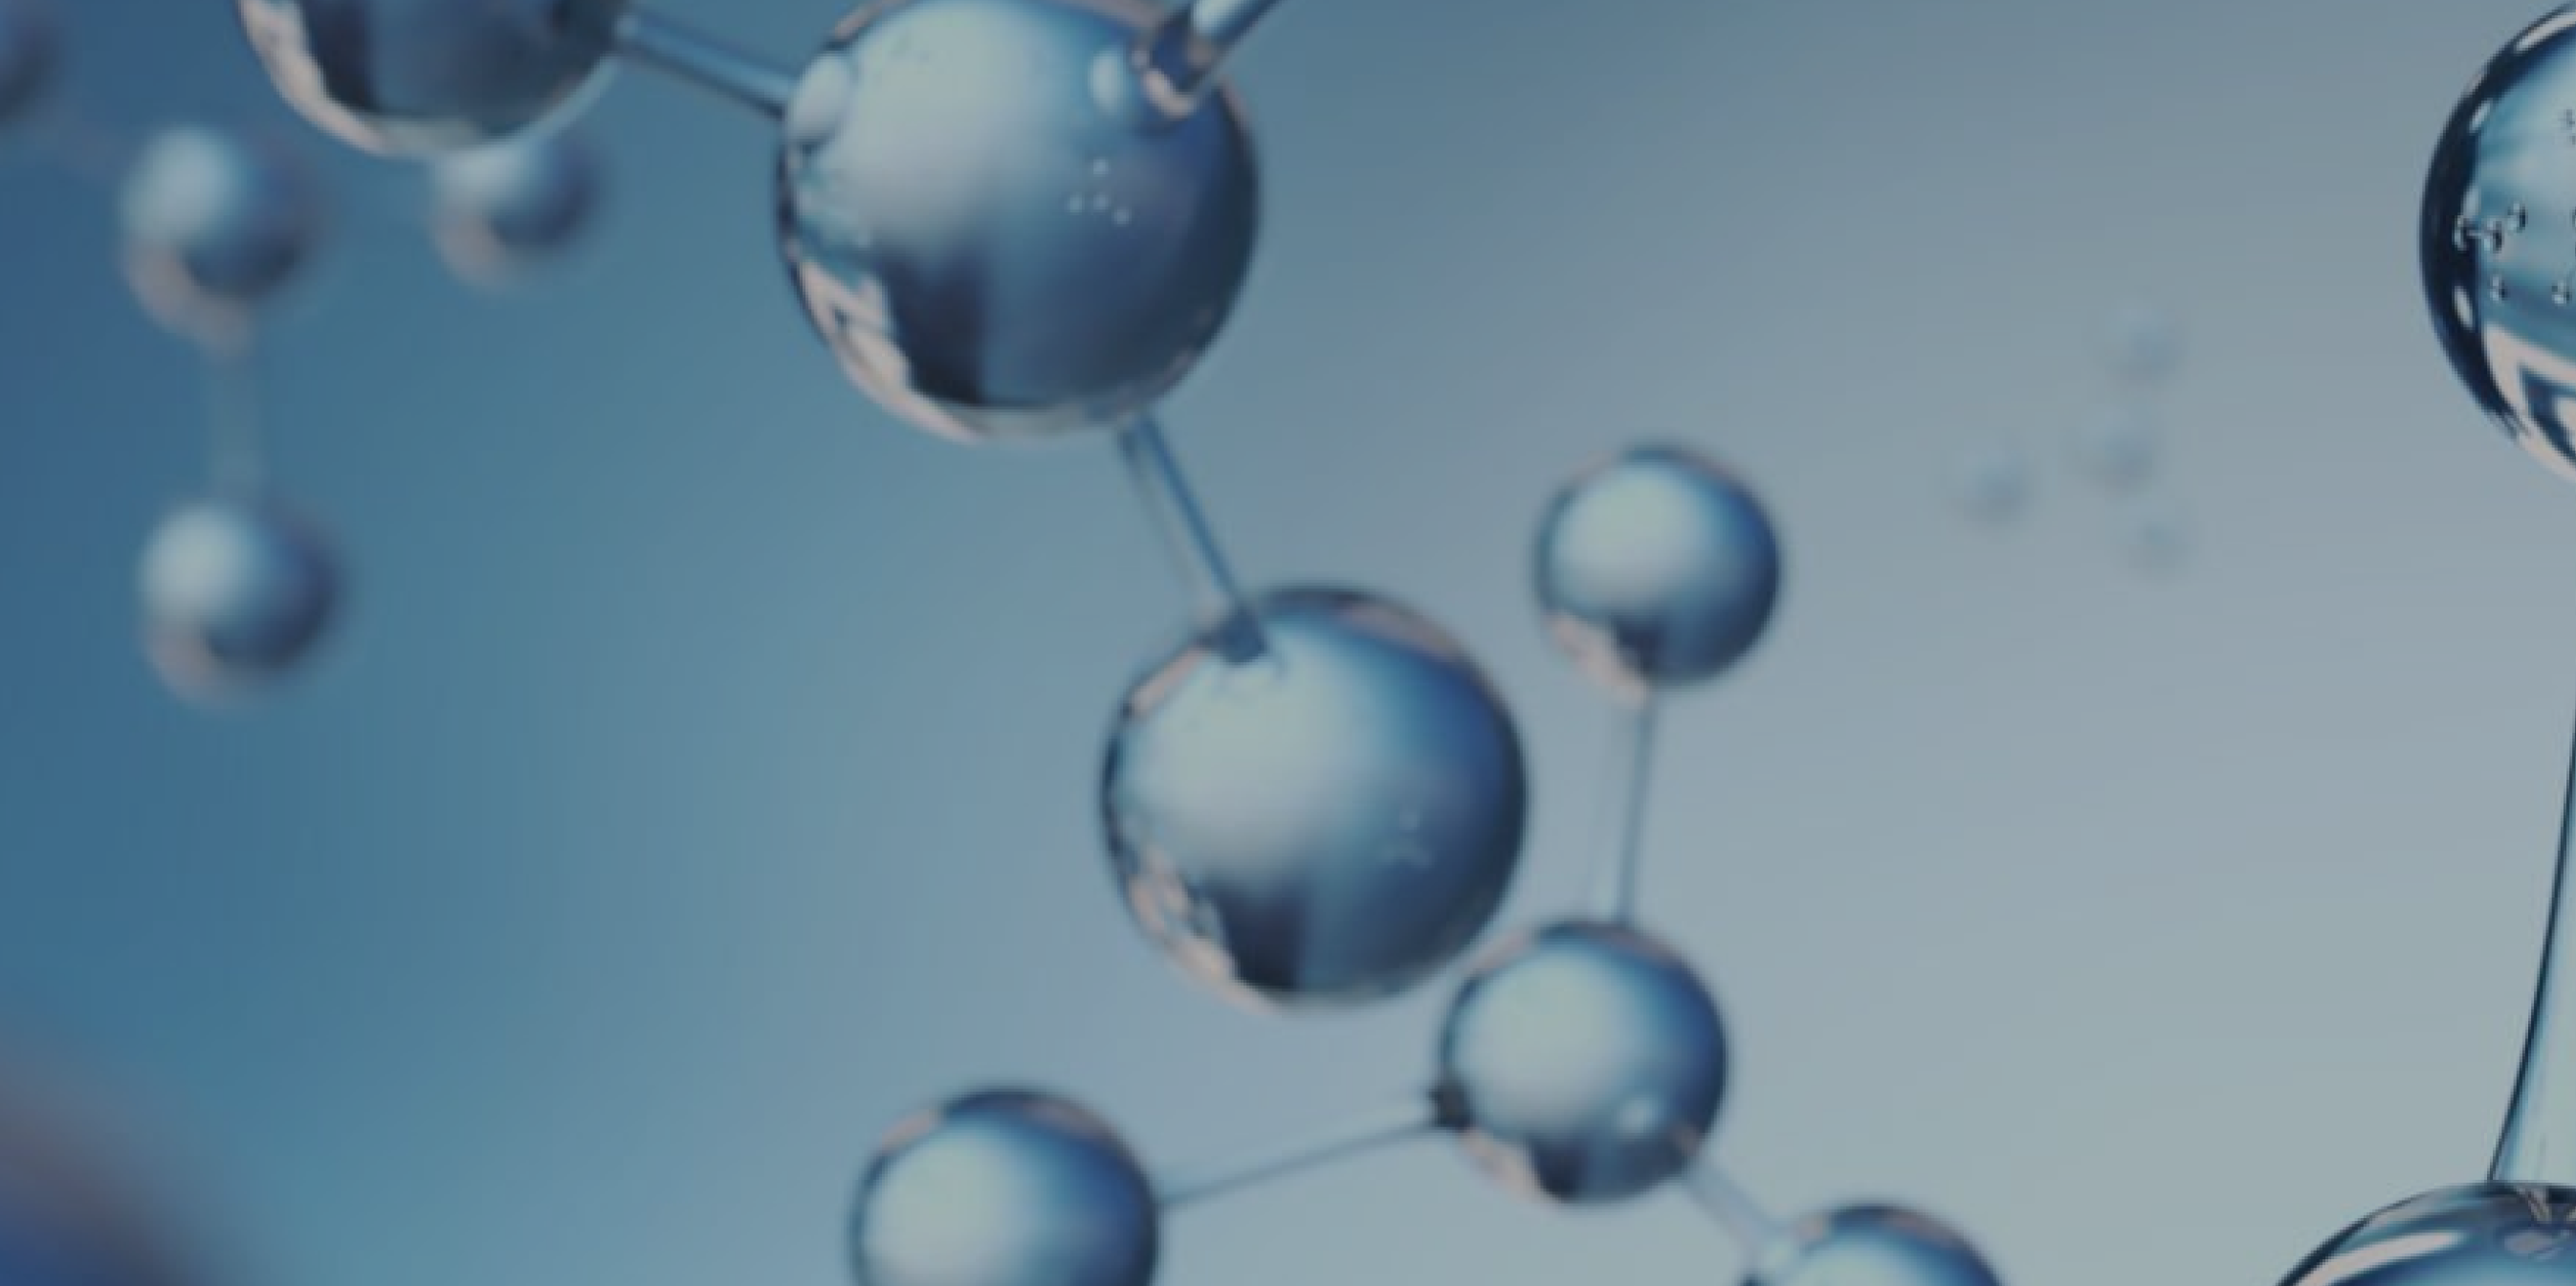 Abstract image of atoms and molecules in light blue shades